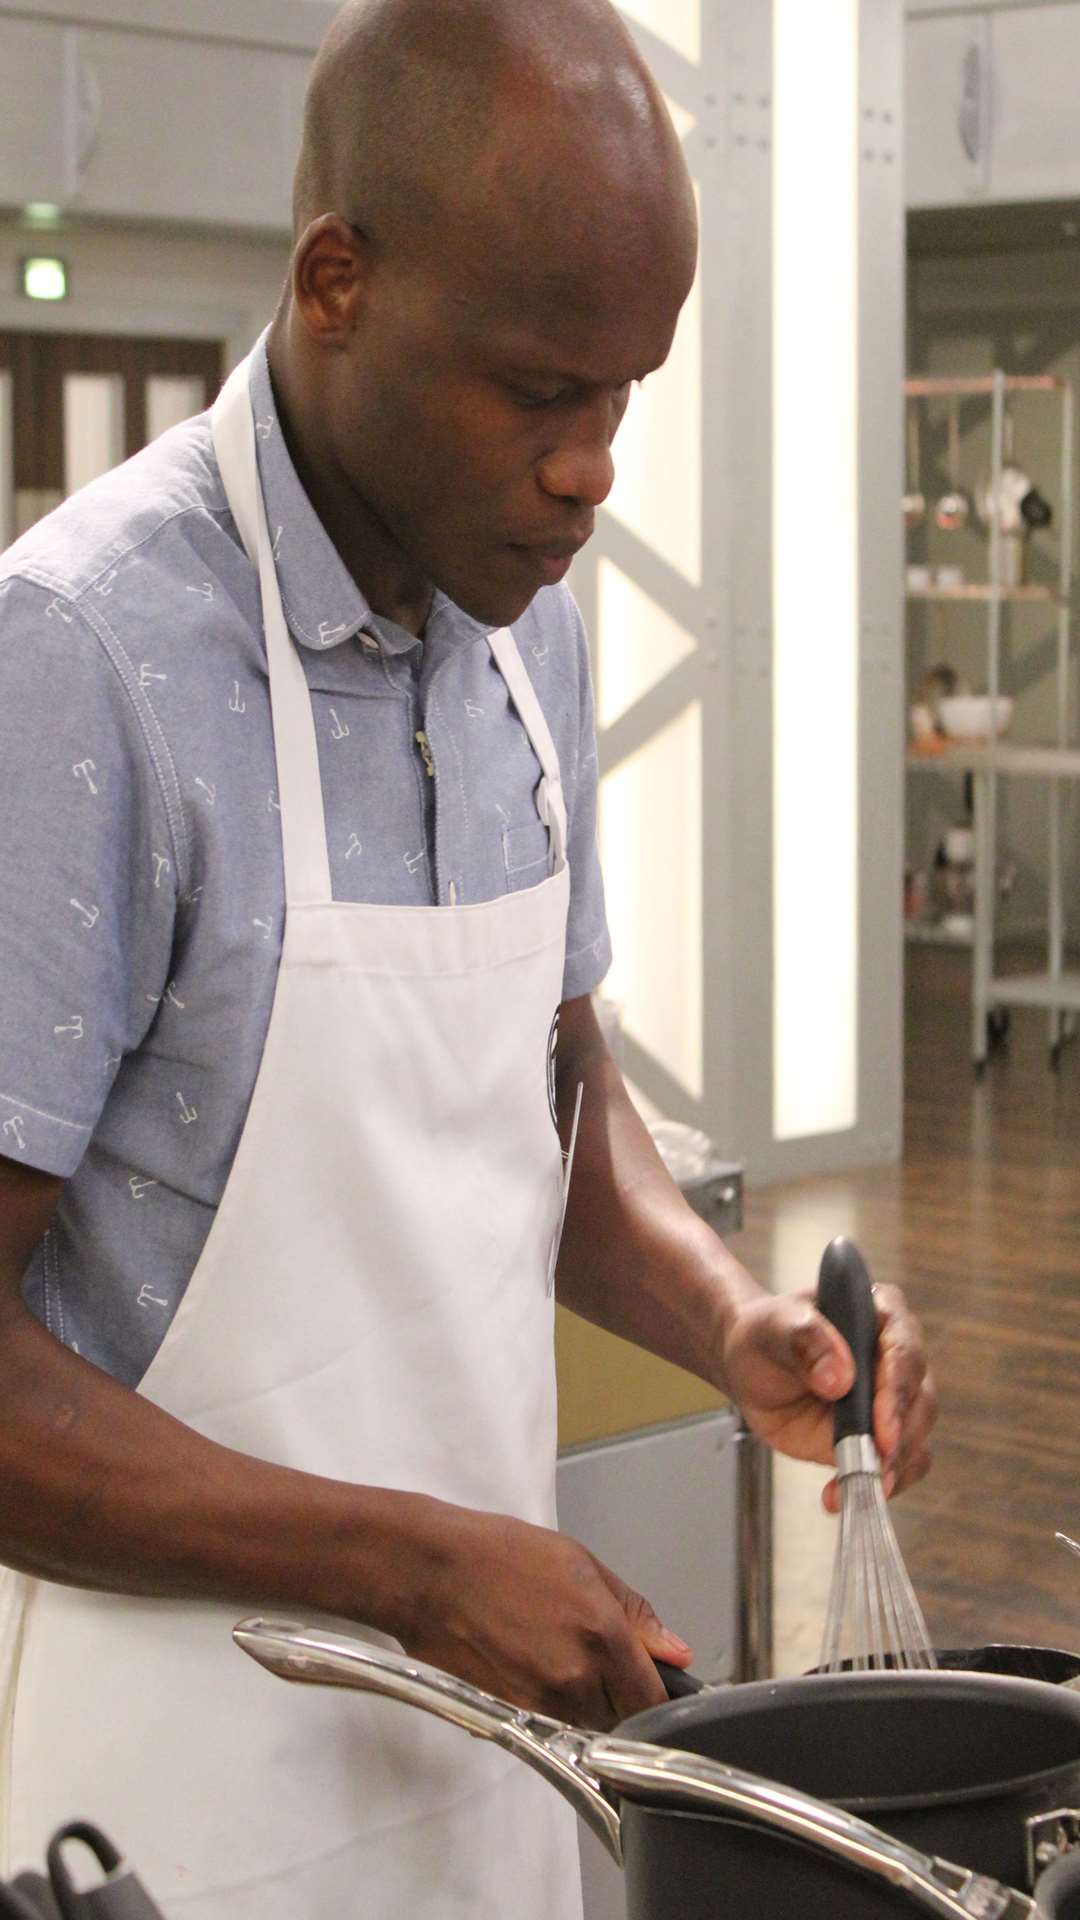 Aylesford chef Petrus Madutlela feels the heat in the MasterChef kitchen